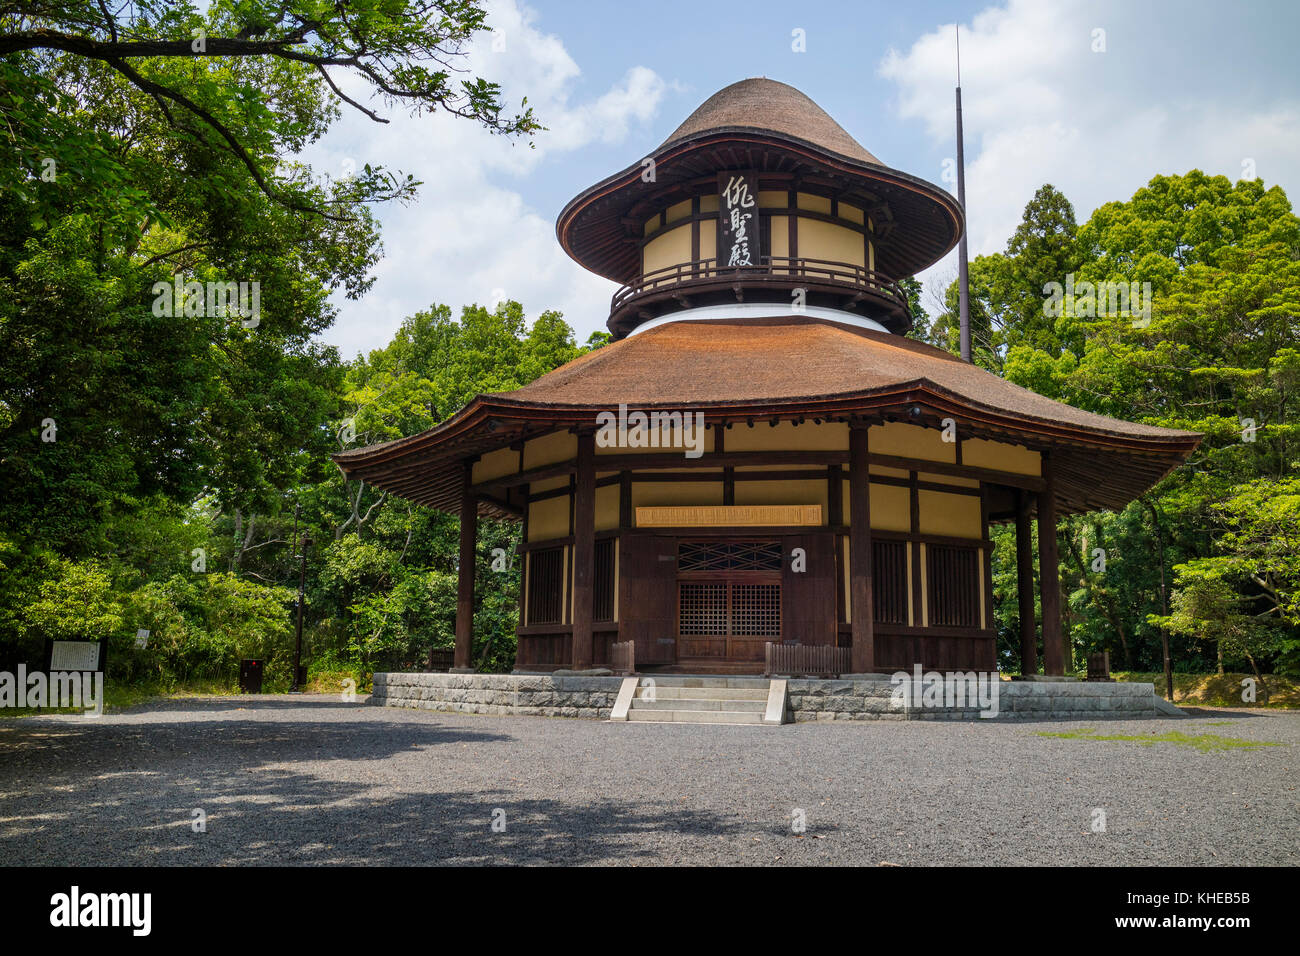 Iga Ueno - Japan, June 1, 2017: Haiseiden Hall, a building in the shape of a hat, which commemorates the 300th anniversary of Basho's birth in Isa Uen Stock Photo